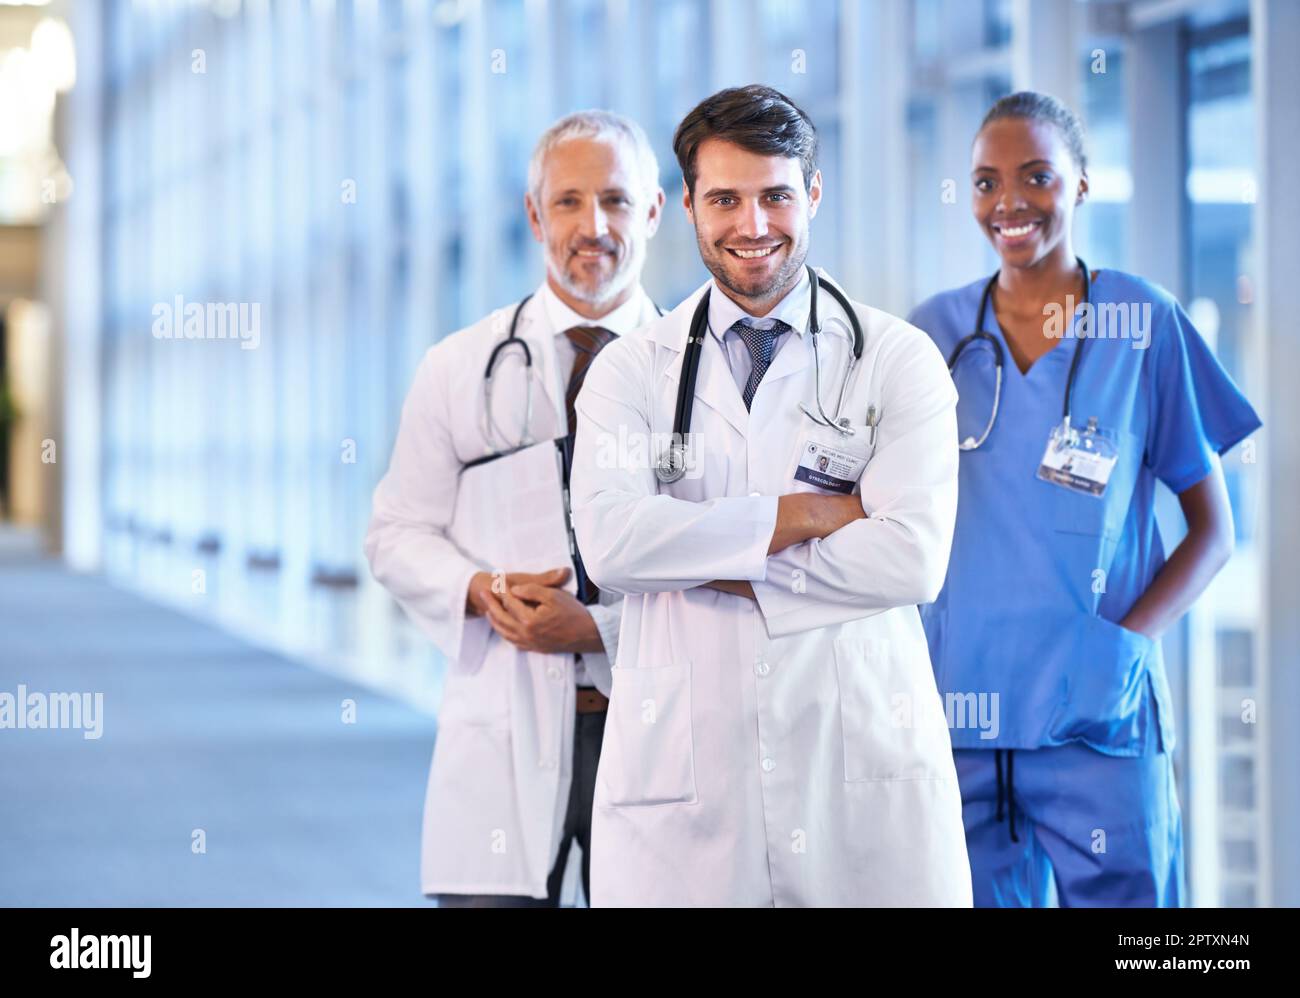 The team to get you back on track. A medical team standing in the hospital corridor Stock Photo